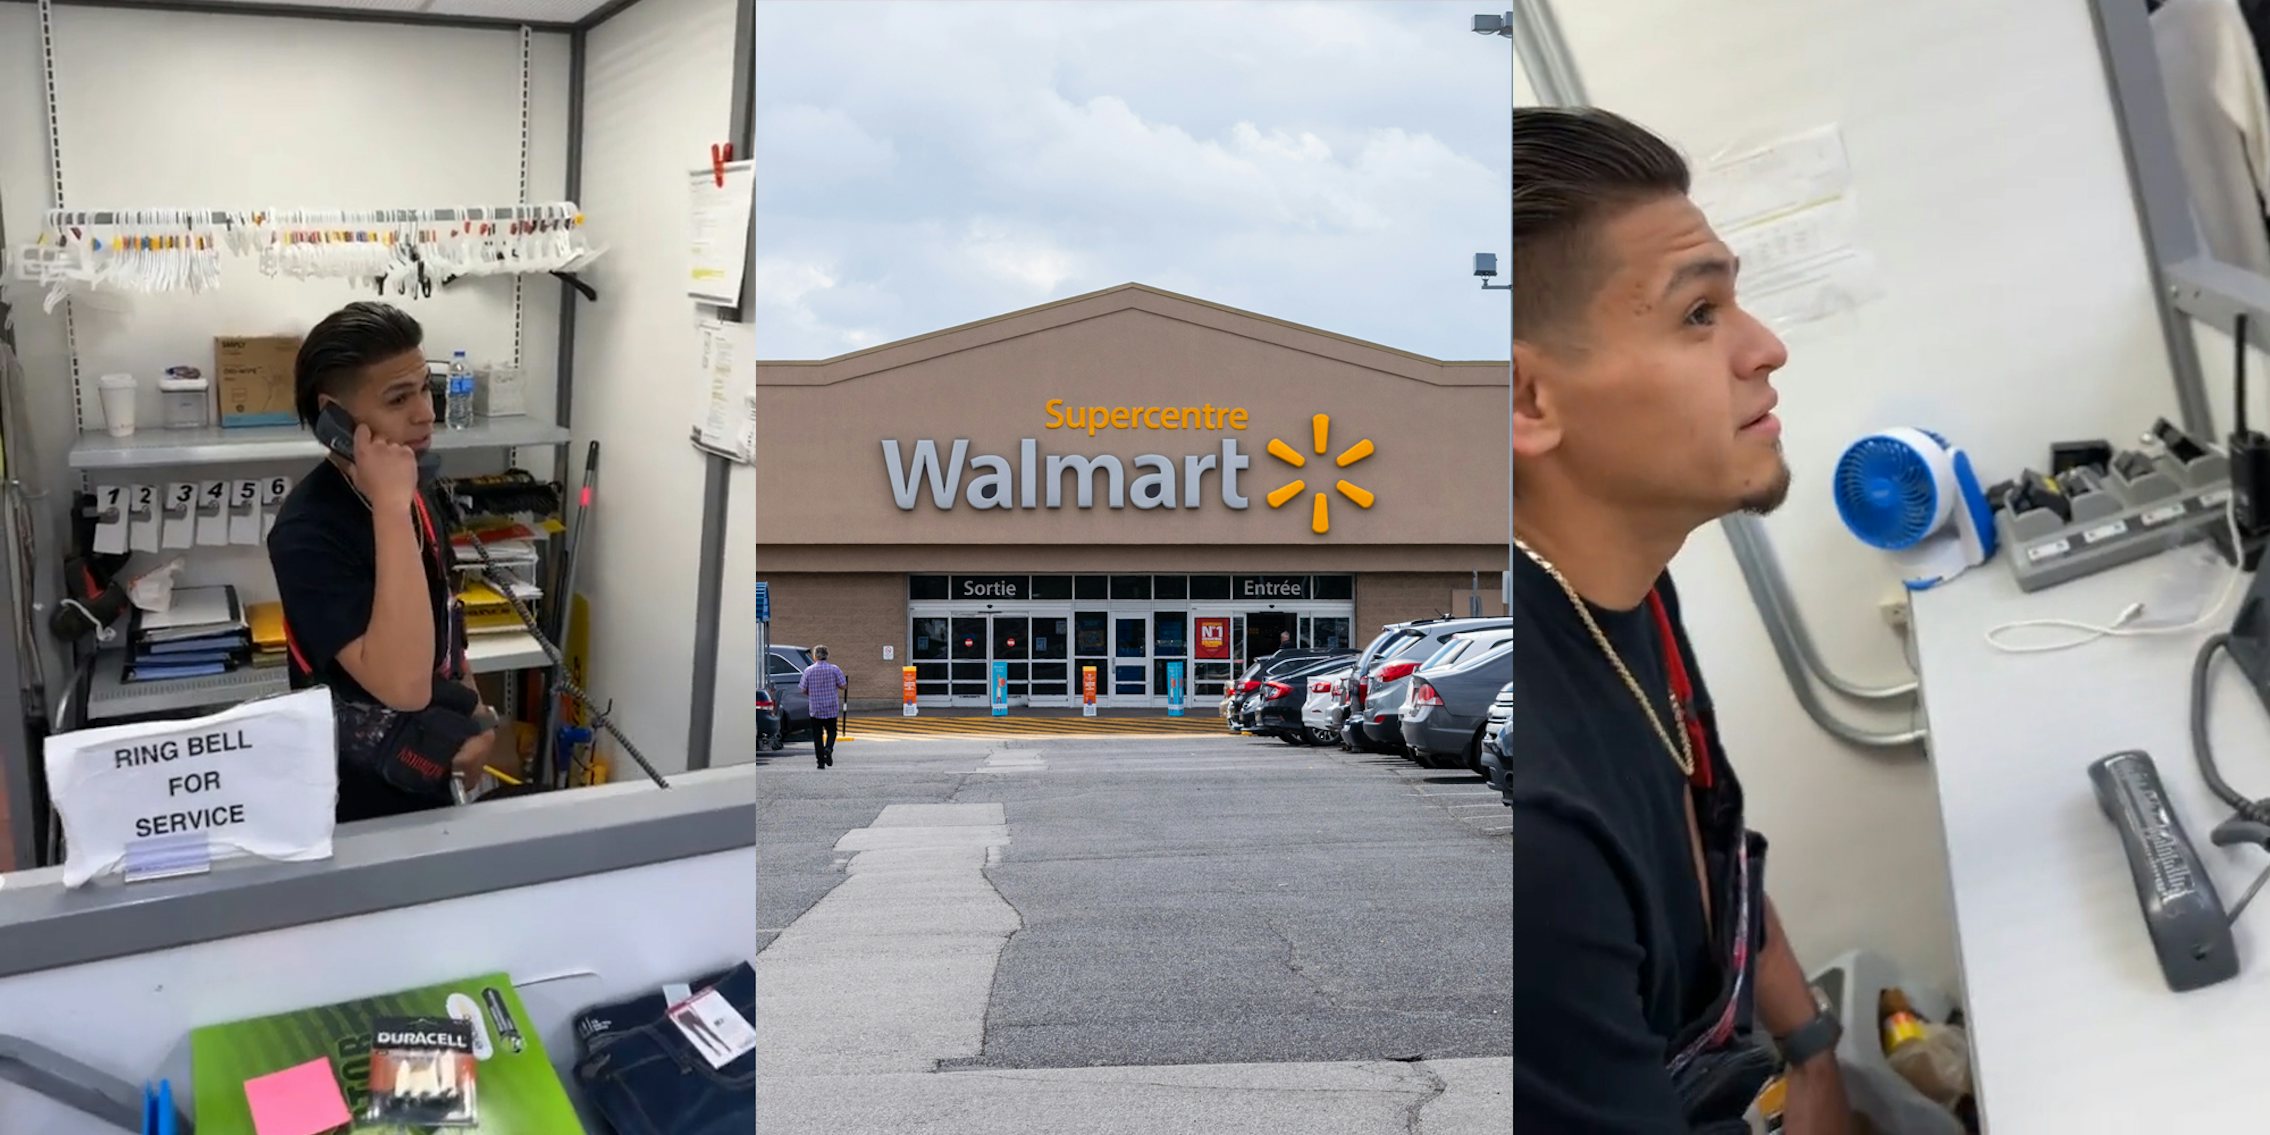 Walmart employee on phone (l) Walmart building with sign and parking lot (c) Walmart employee on speaker phone with customer complaining (r)